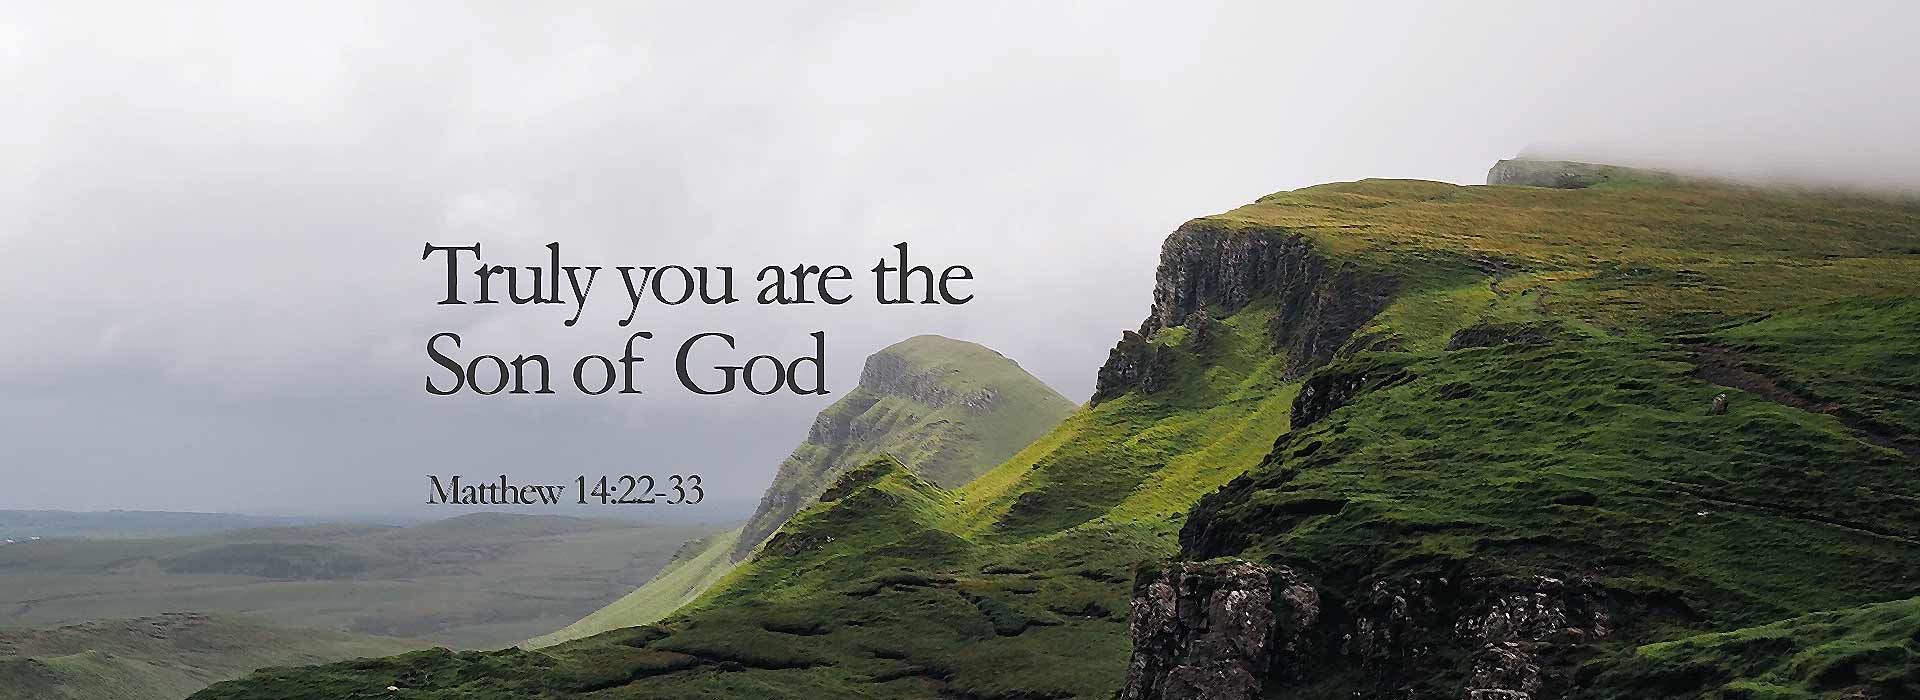 Truly you are the son of God